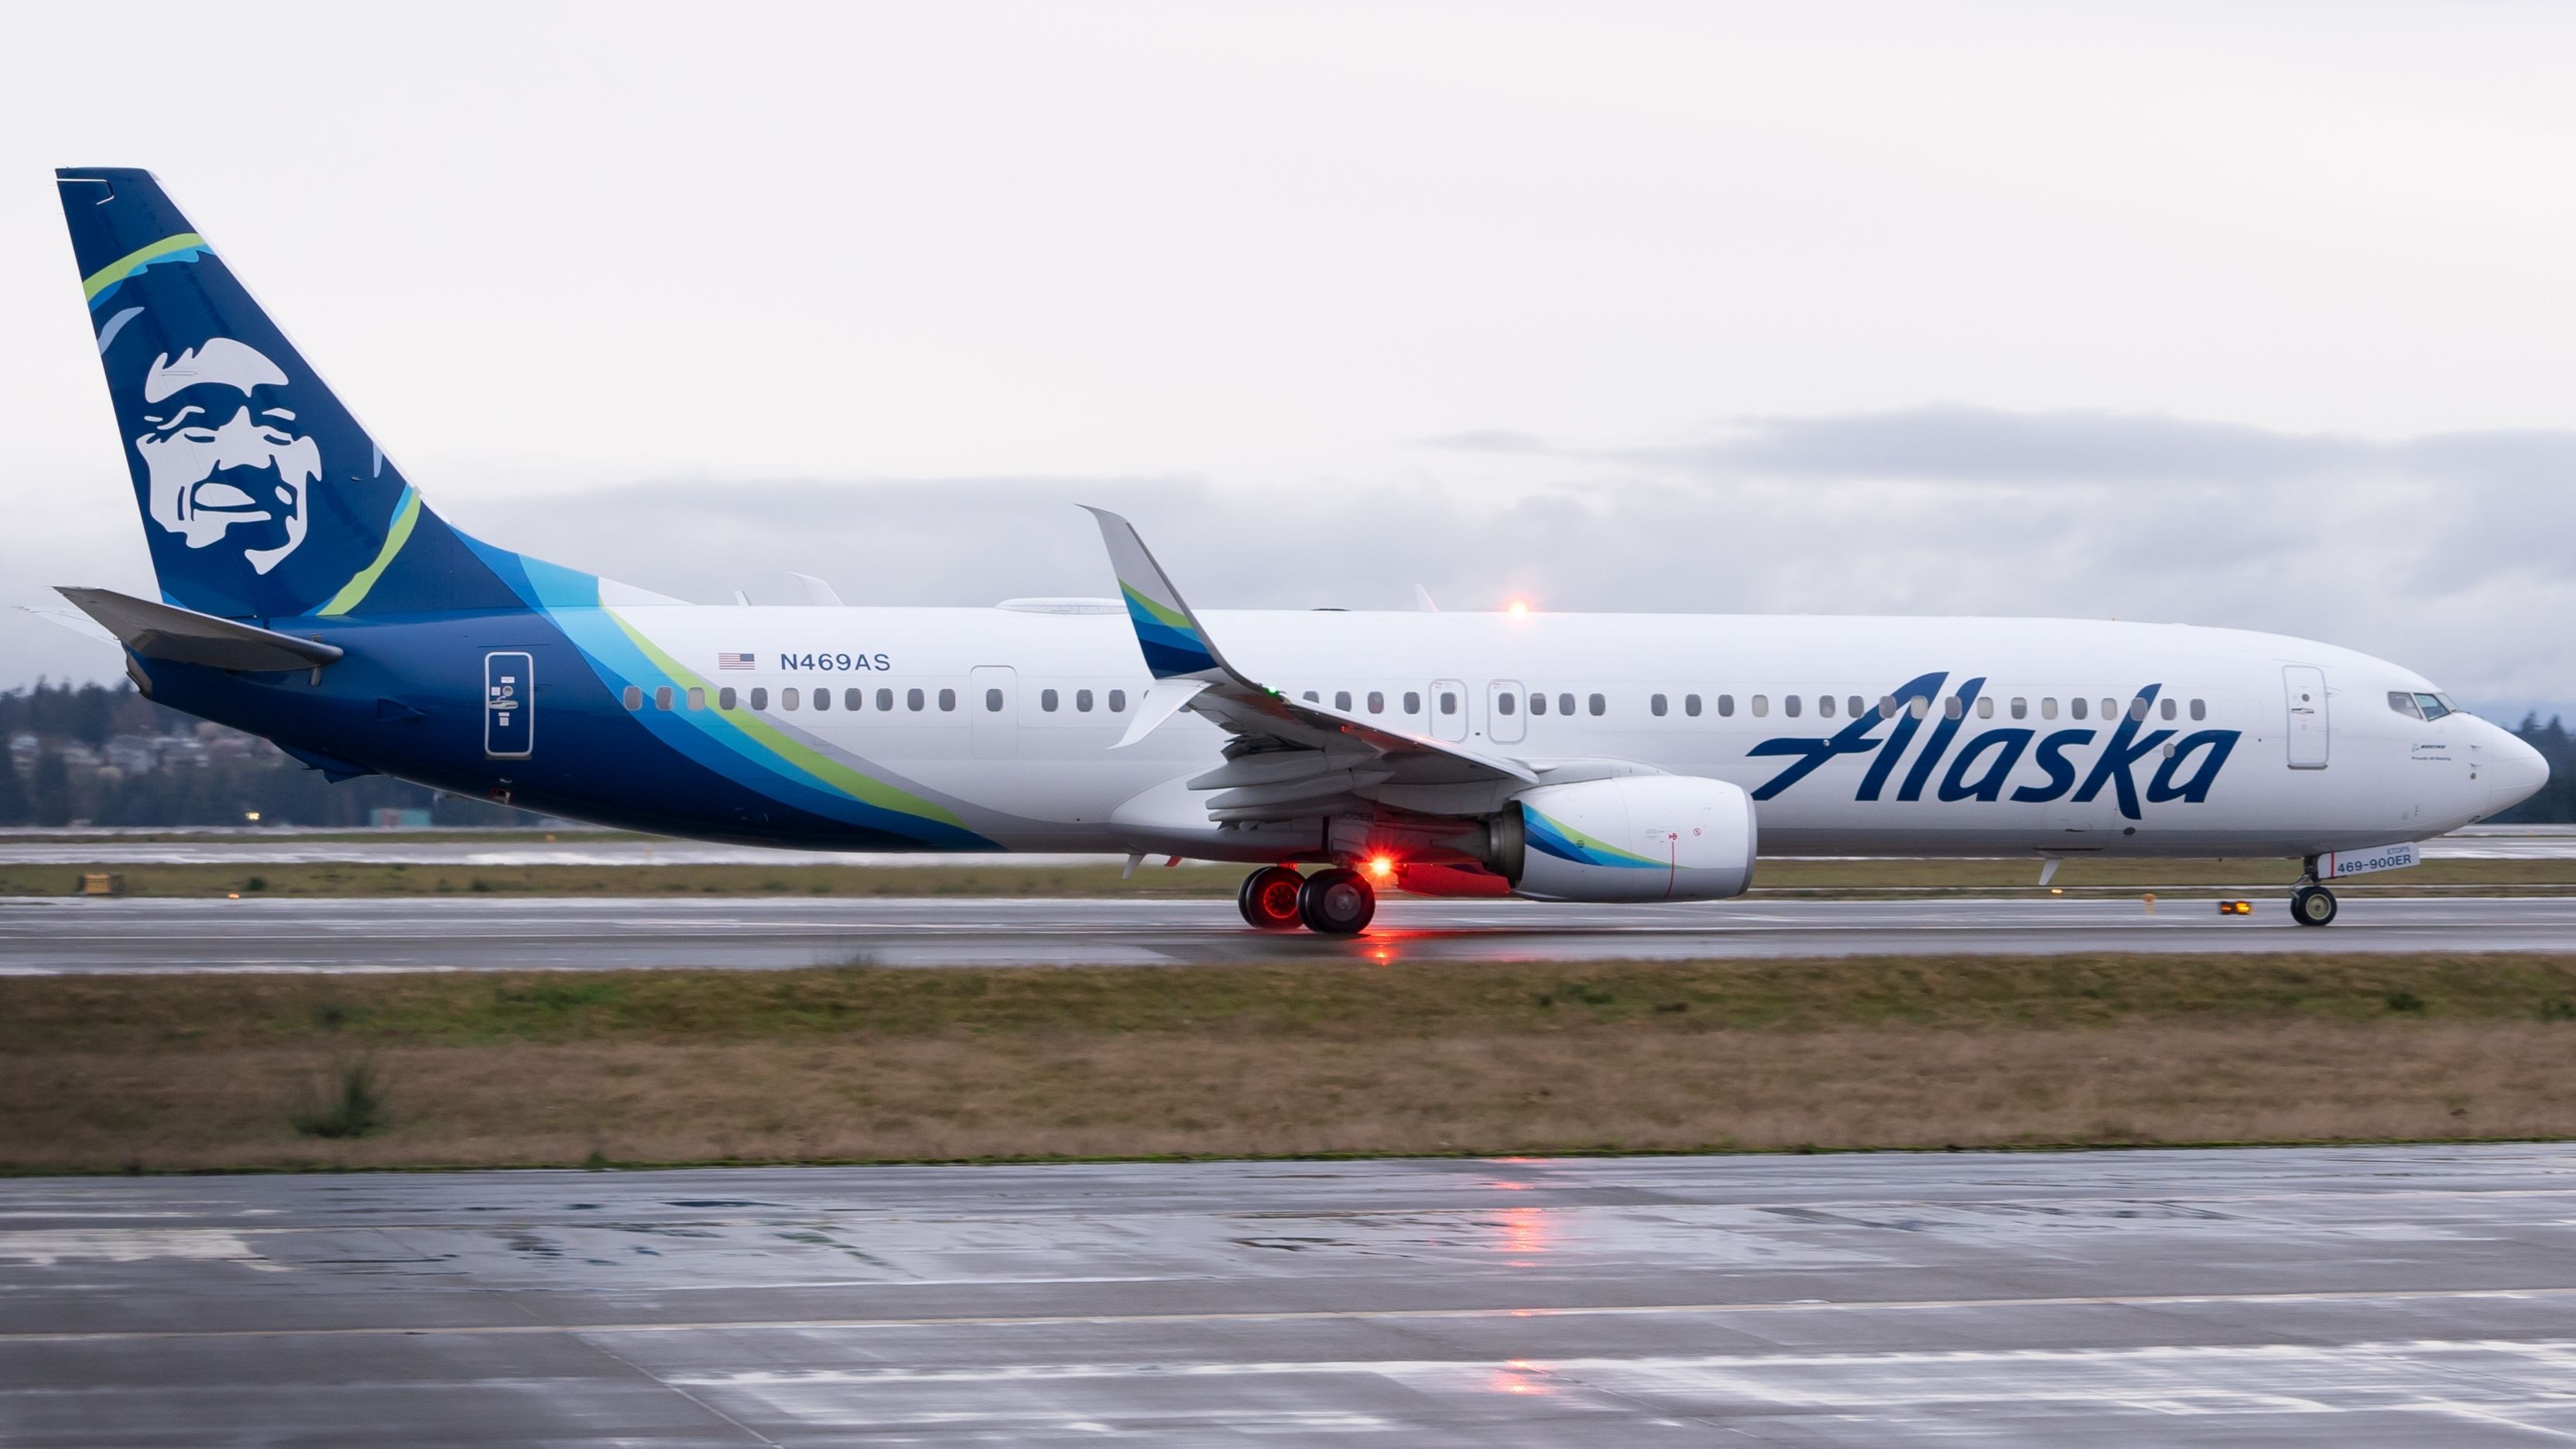 An Alaska Airlines Boeing 737-900ER on an airport apron.